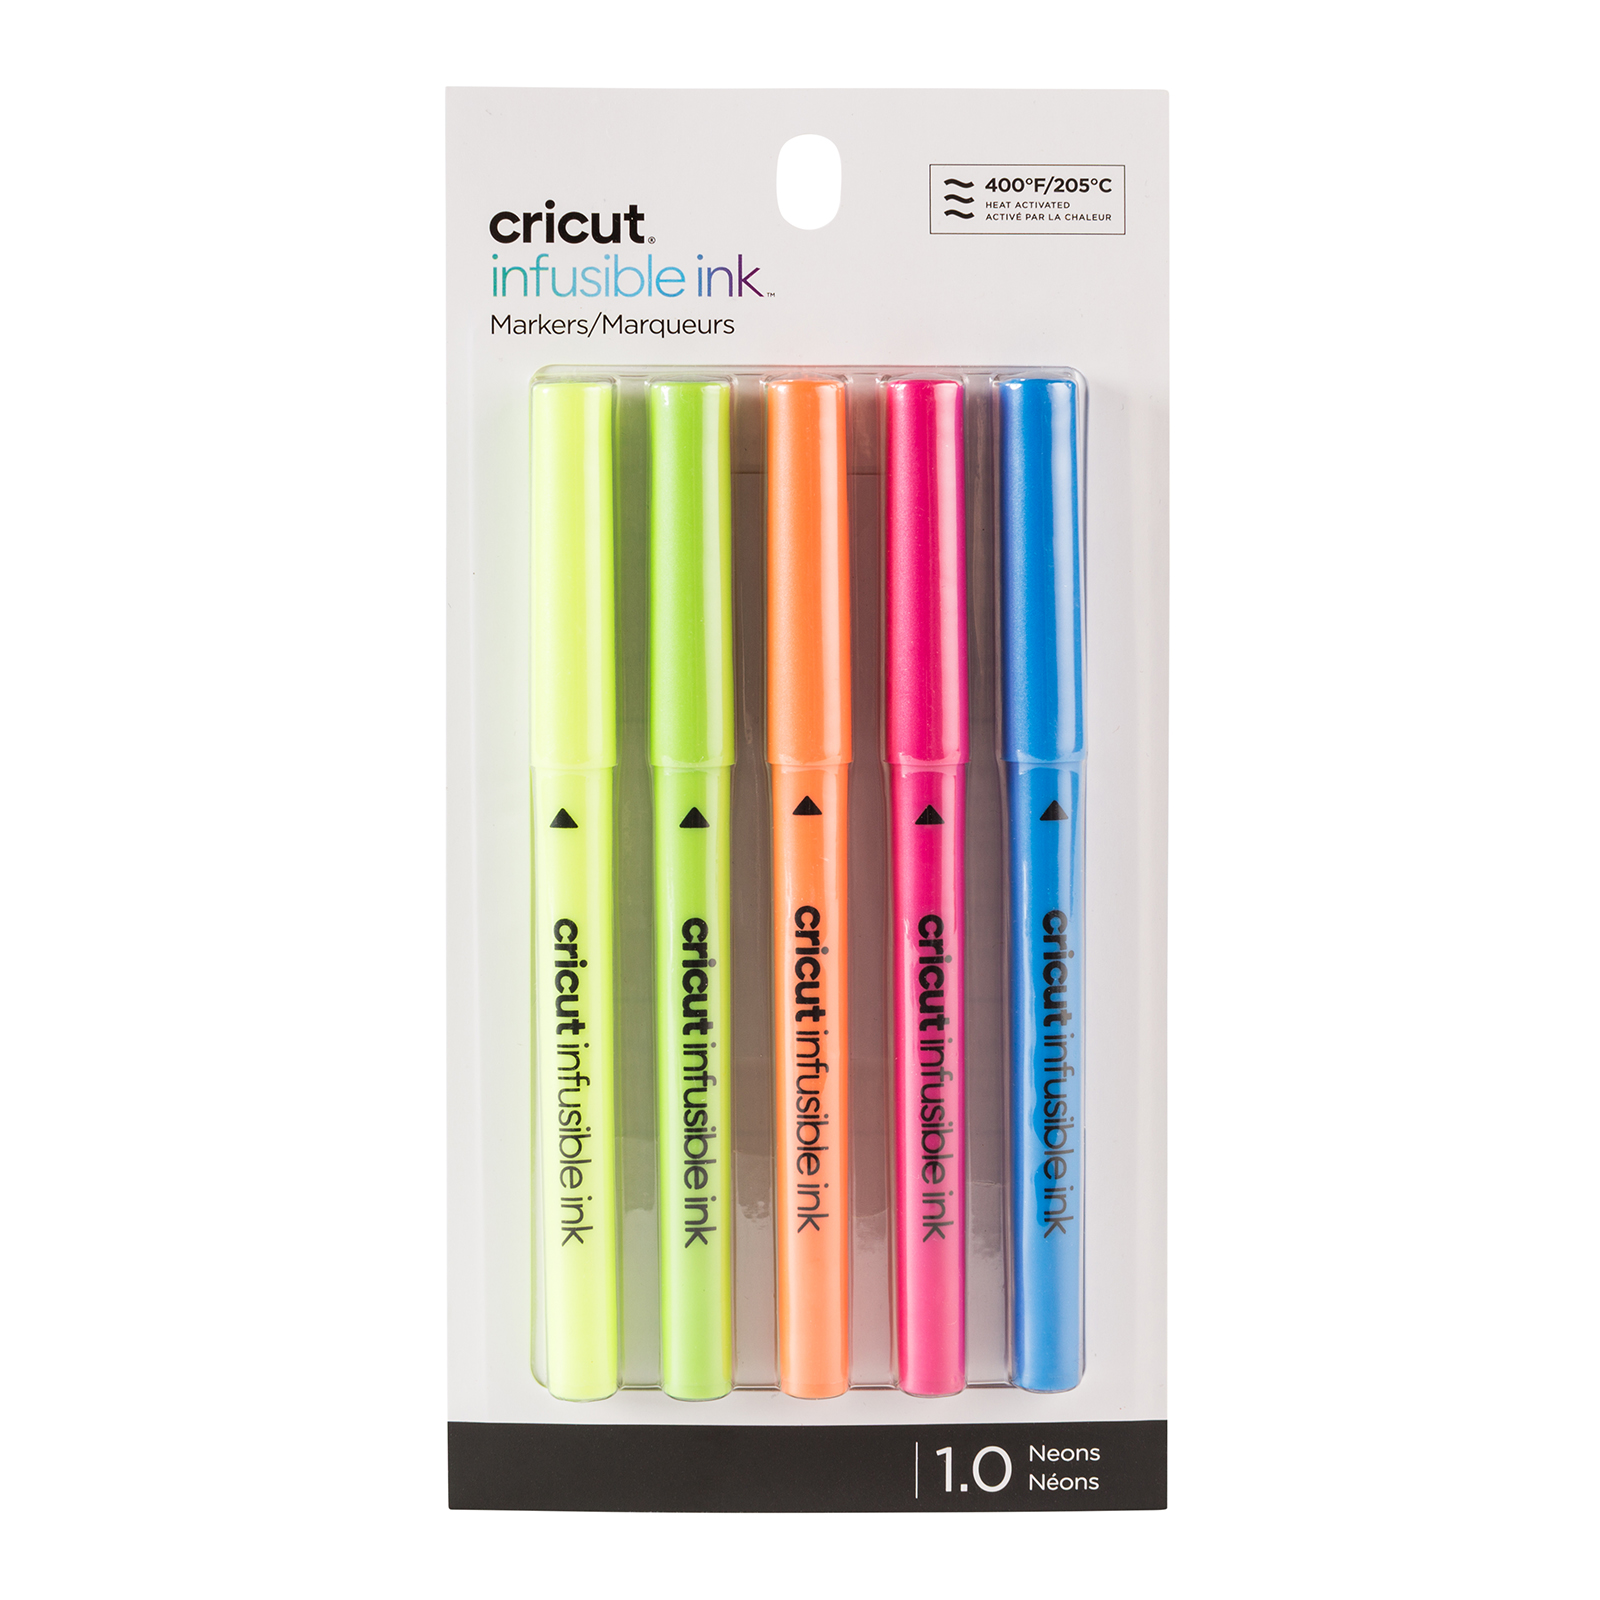 Cricut • Infusible Ink Markers (1.0) Neons